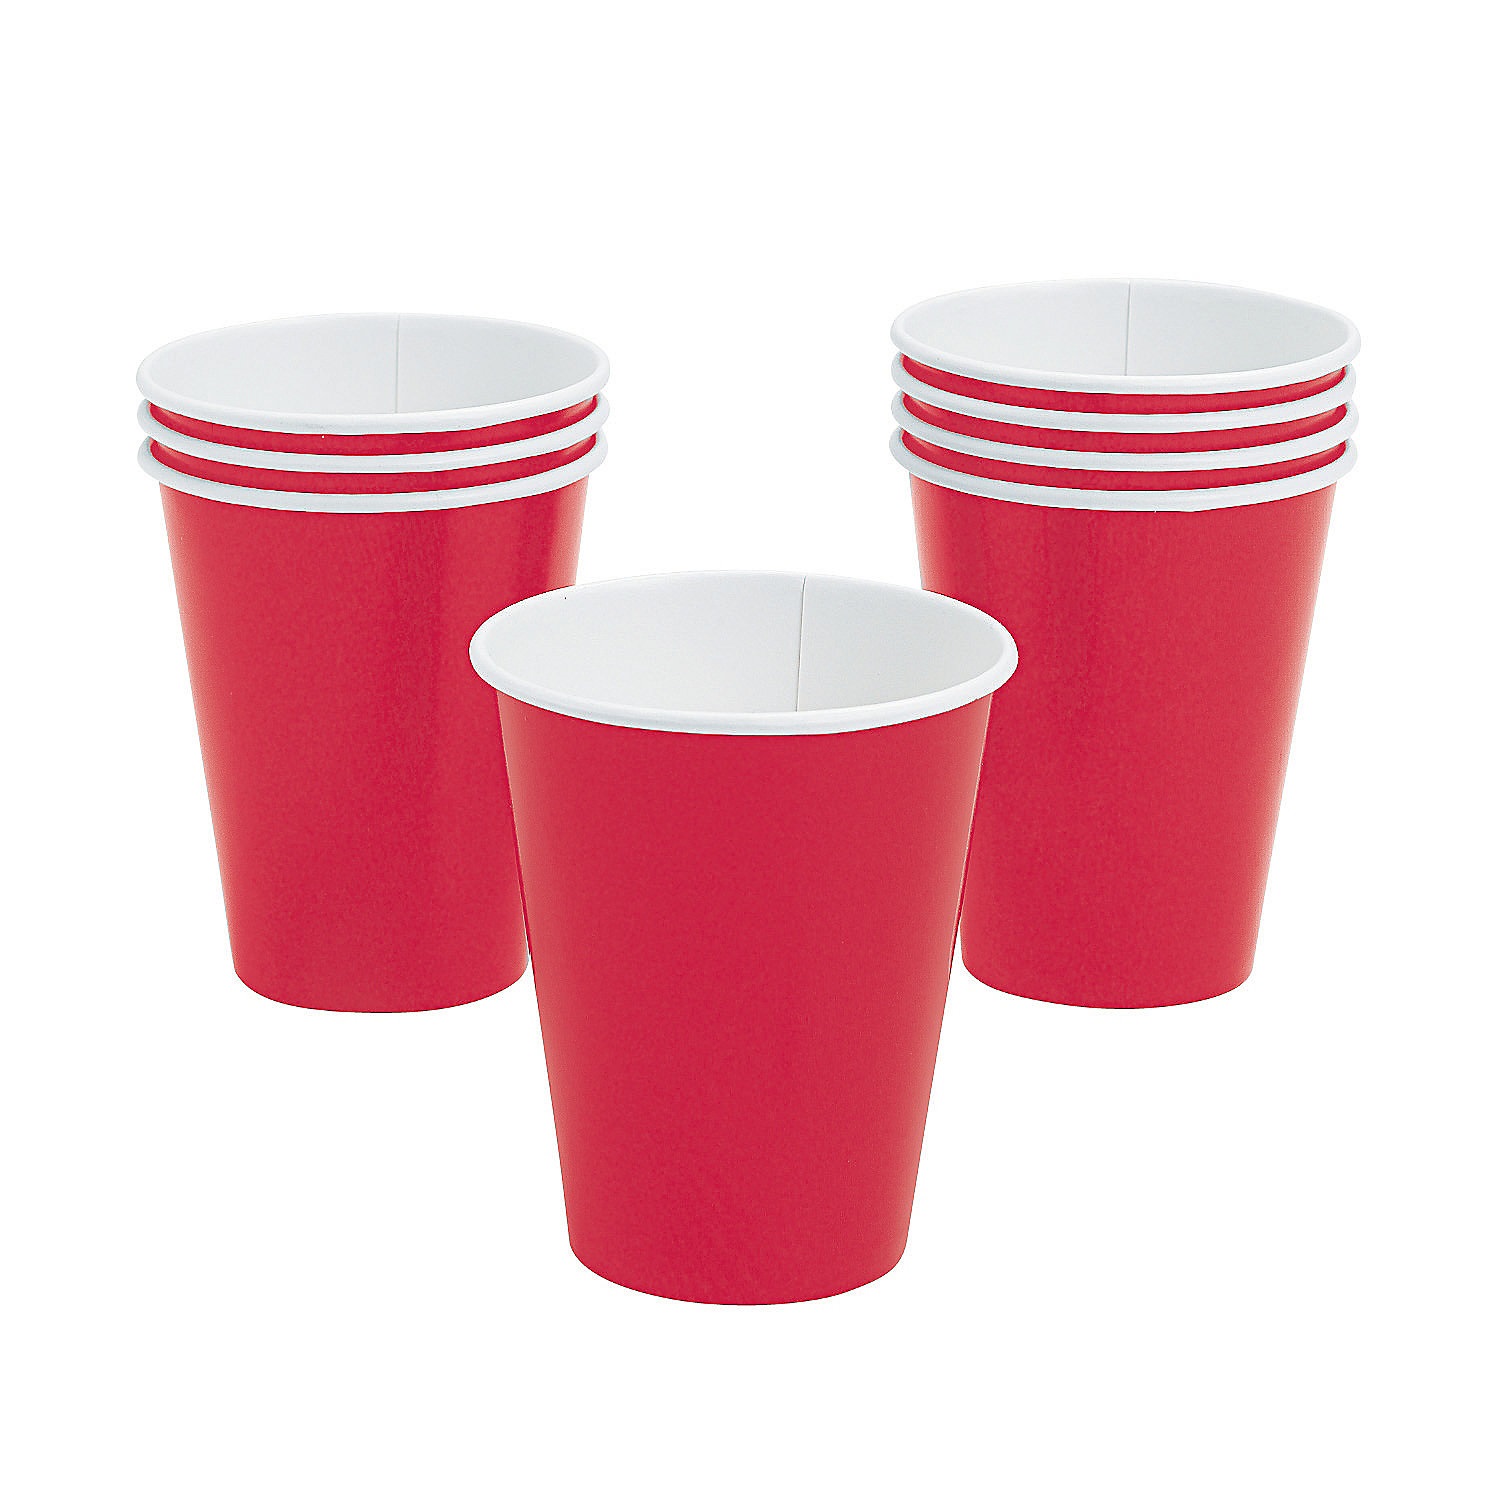 red-solid-color-paper-cups-24-ct-_70_1063